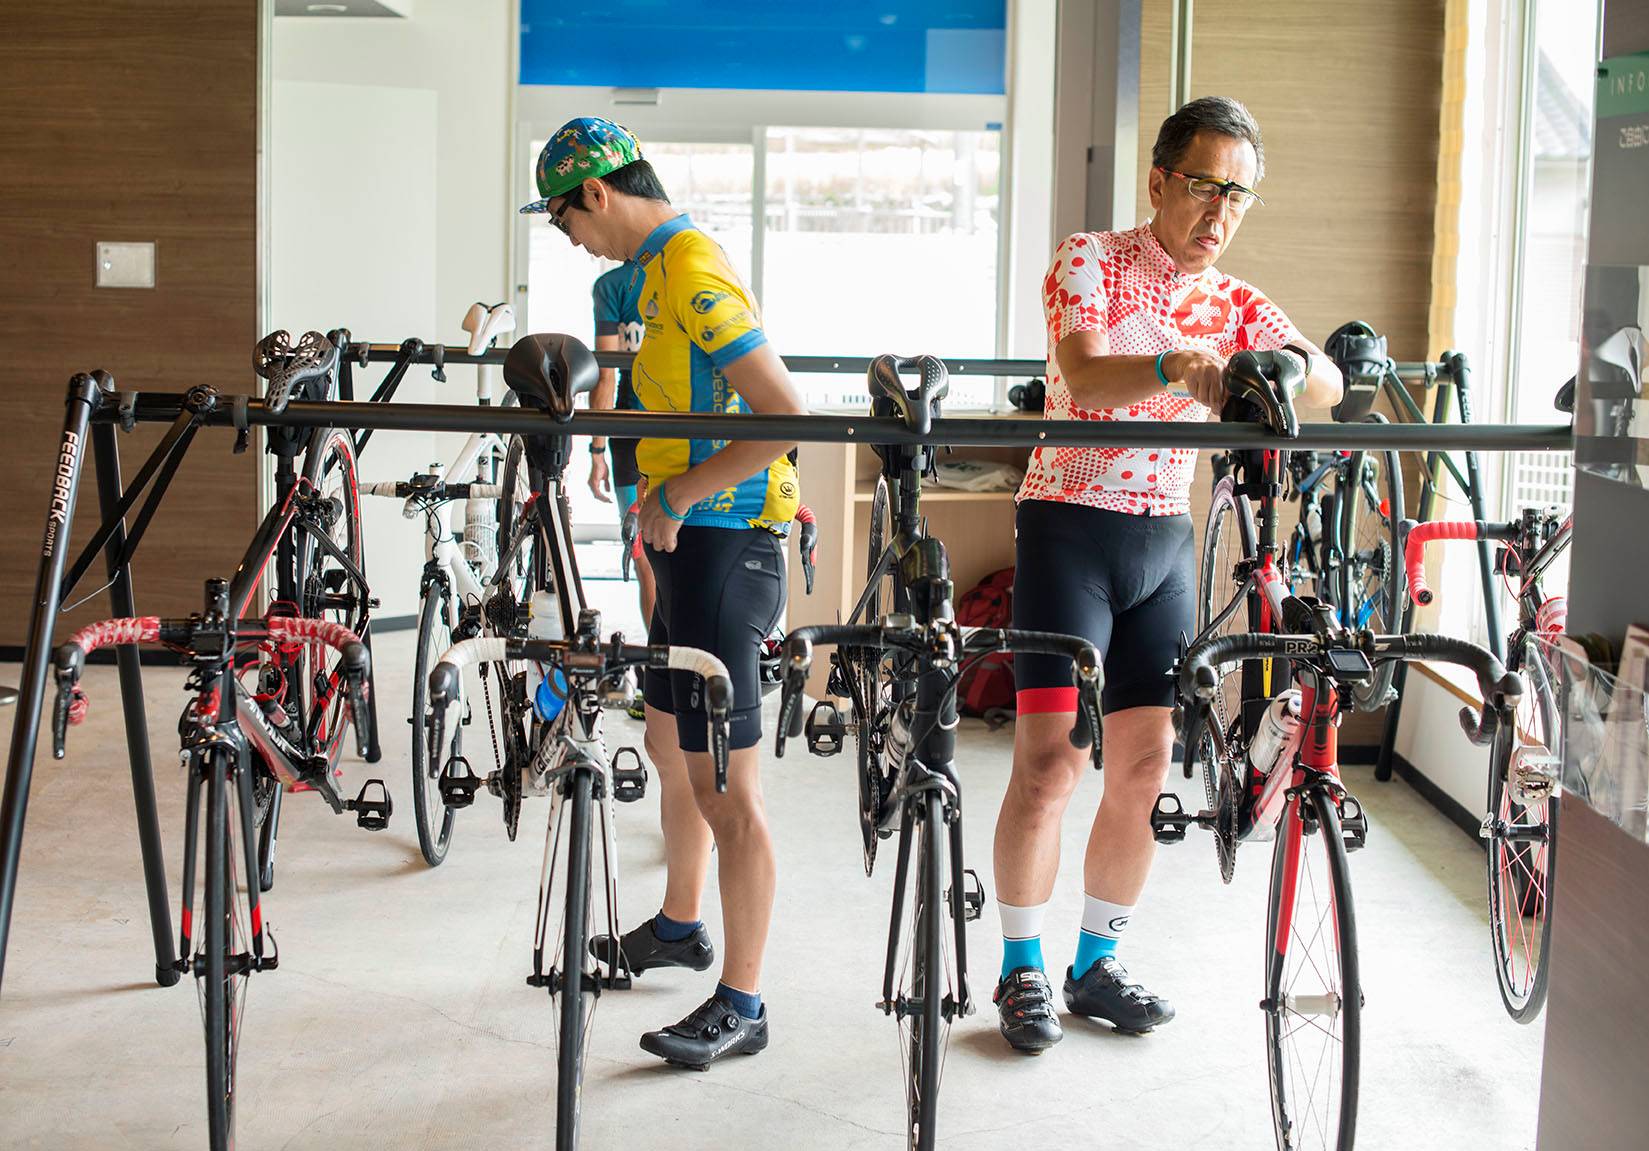 Cyclists gather at Suruga Bank's cycle station before heading off on a 90-kilometer ride co-organized by the bank and the Izu Development Association in Izu City, Shizuoka Prefecture, in August 2019. | ROB GILHOOLY